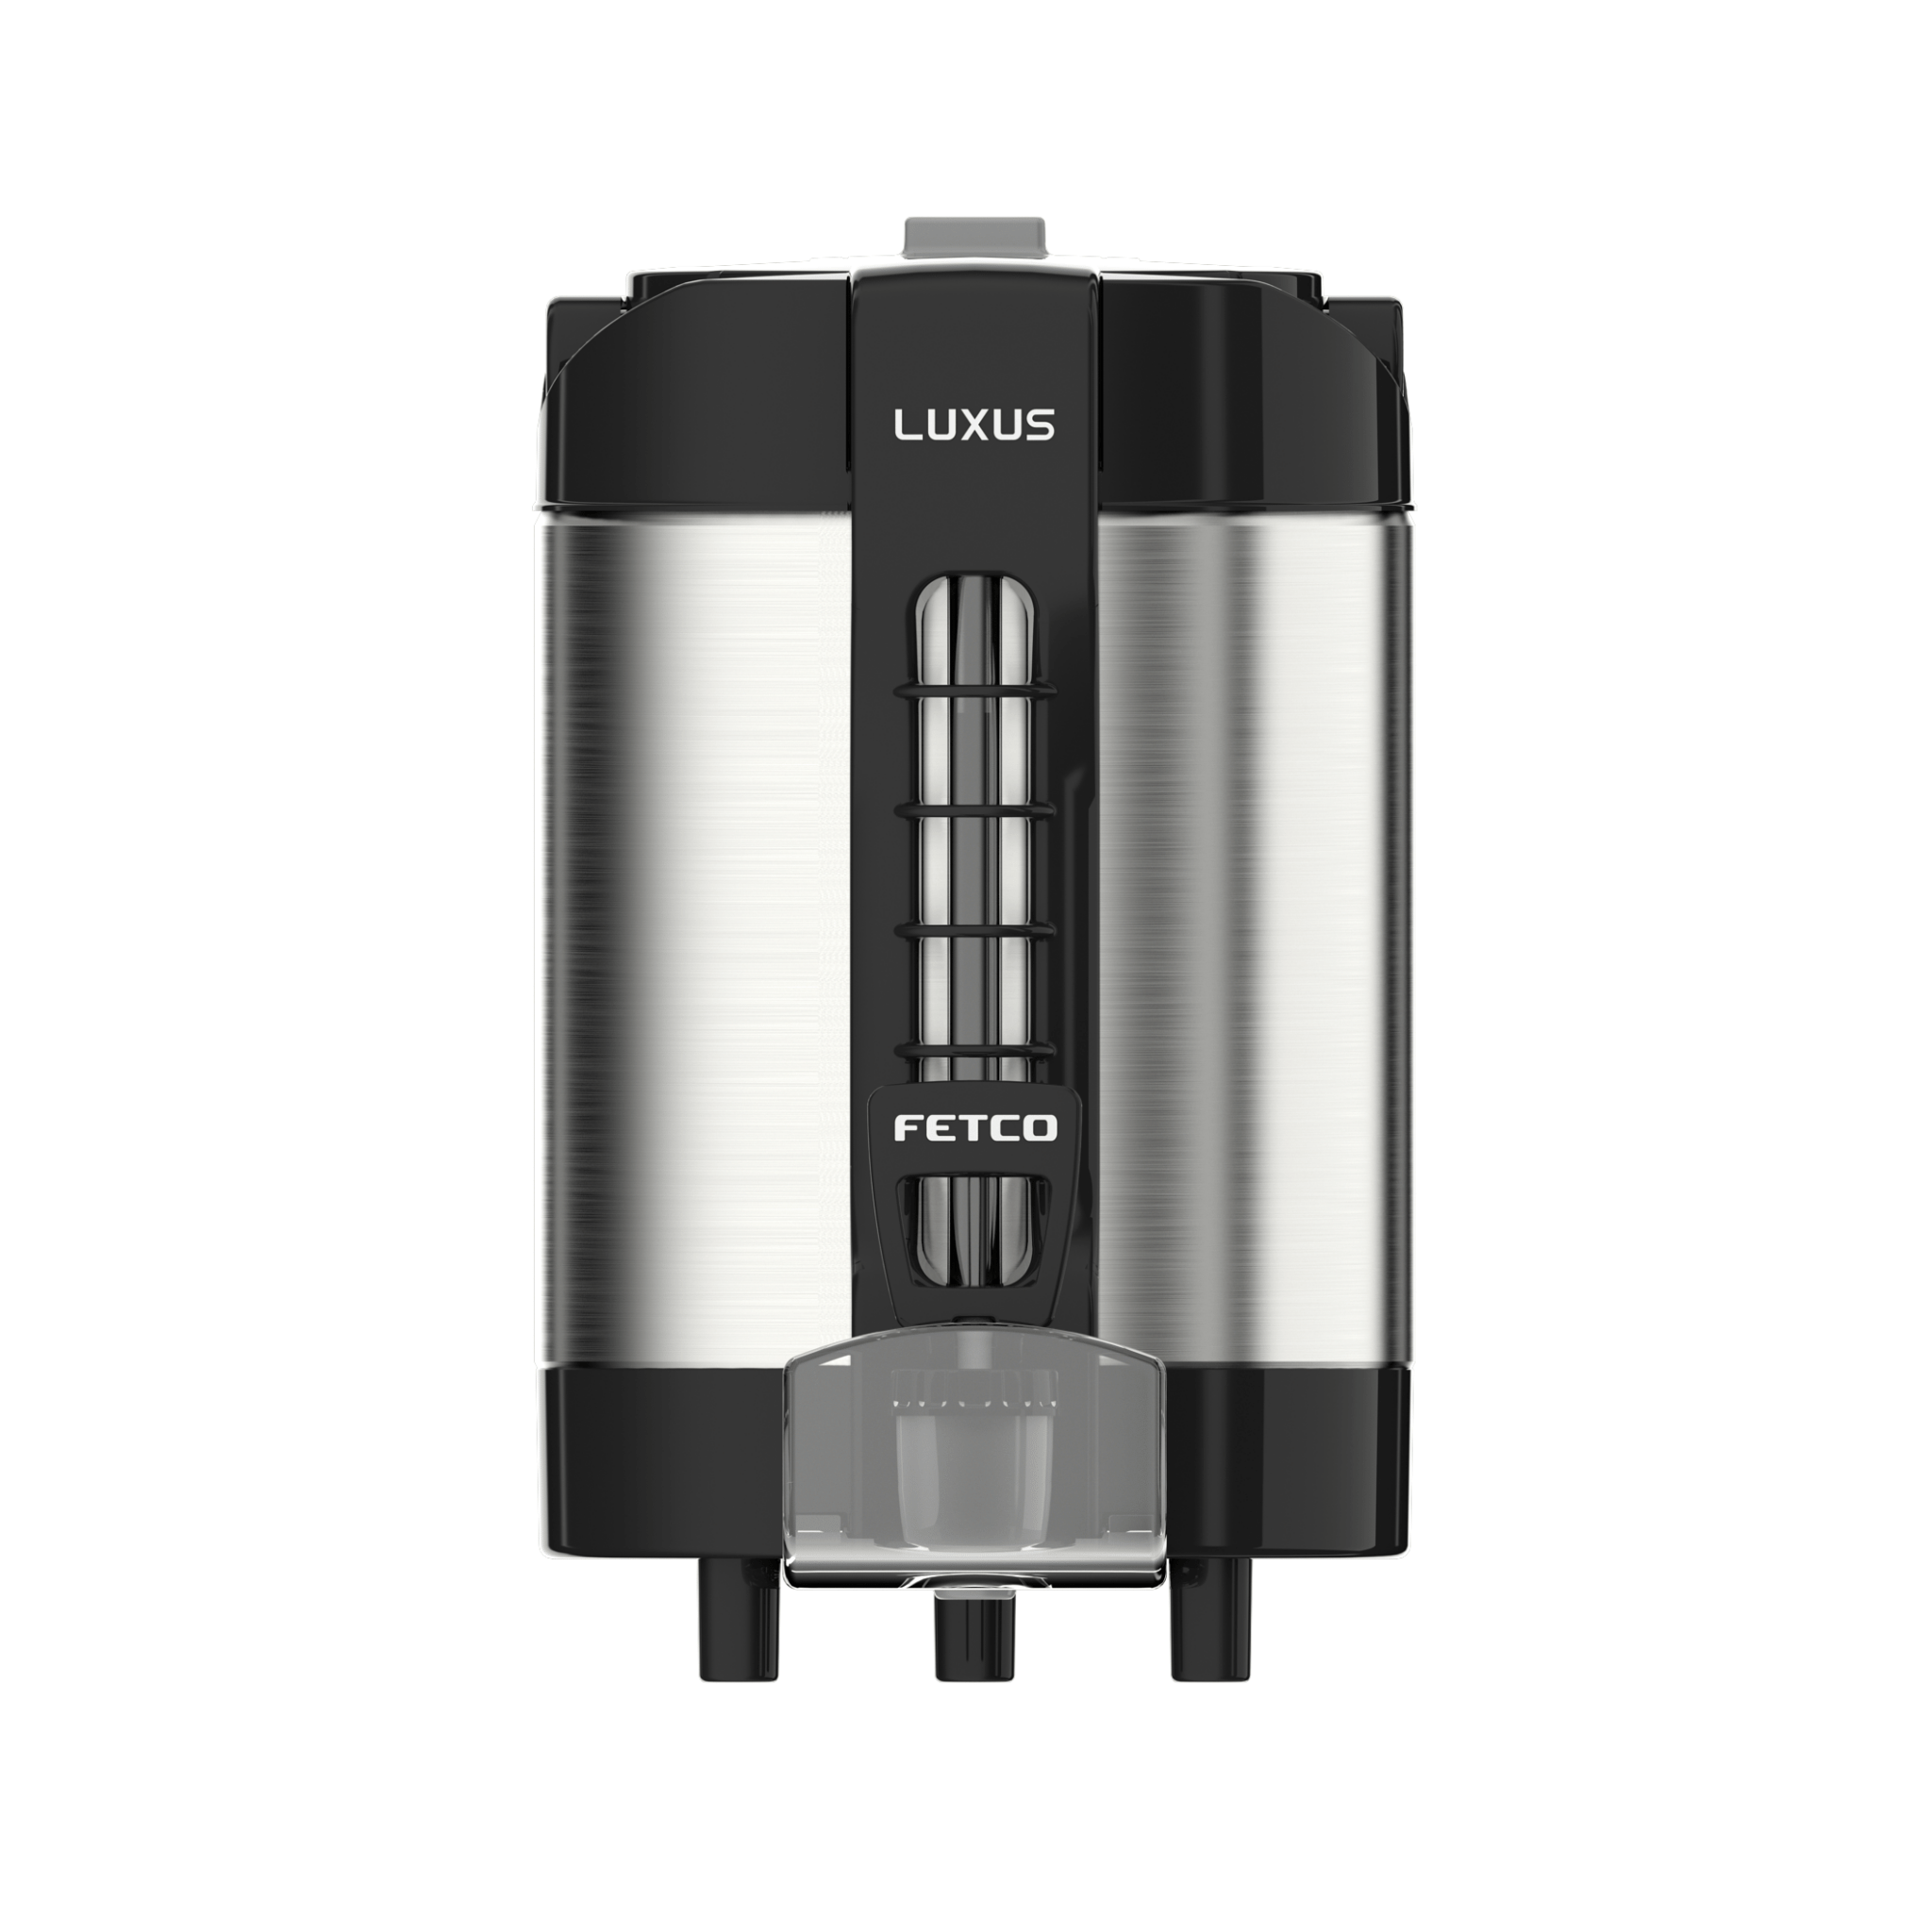 https://cdn.shopify.com/s/files/1/1566/4409/products/fetco-fetco-luxus-lgs-thermal-sight-gauge-coffee-server-1-1-5-2-gal-beverage-dispensers-1-0-gallon-lgs-10-28222708514880-997358.png?v=1699022012